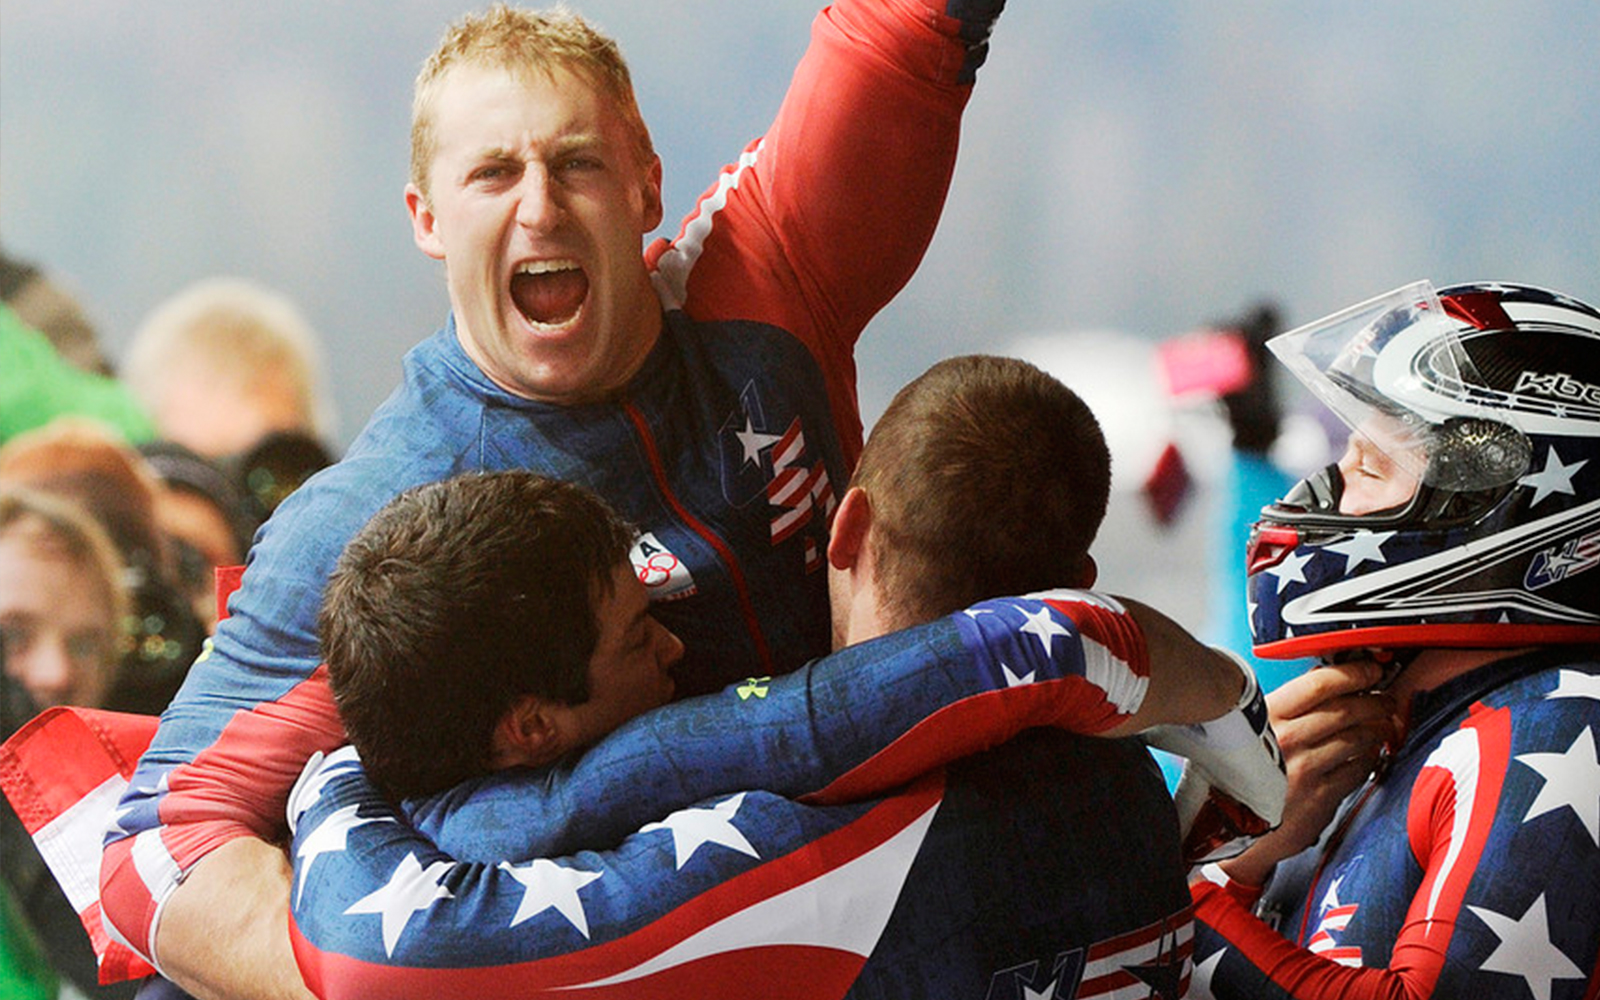 Tomasevicz celebrates with USA-1 teammates after their gold medal finish in the four-man bobsled final at the 2010 Winter Olympics in Vancouver, Canada